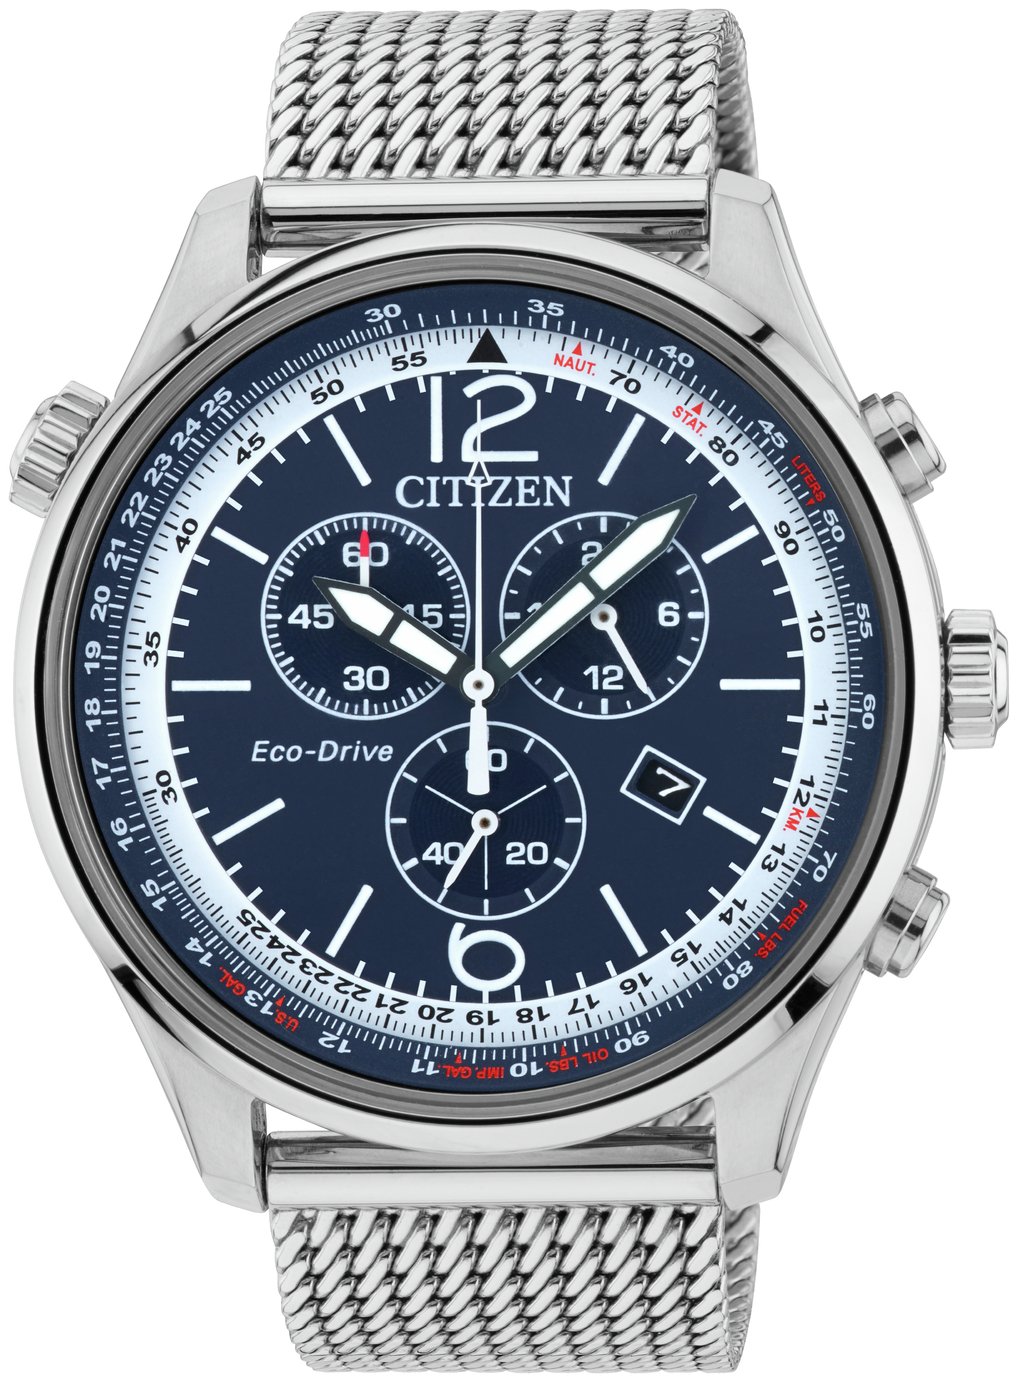 Citizen Eco-Drive Men's Stainless Steel Chronograph Watch (5385878 Citizen Eco Drive Stainless Steel